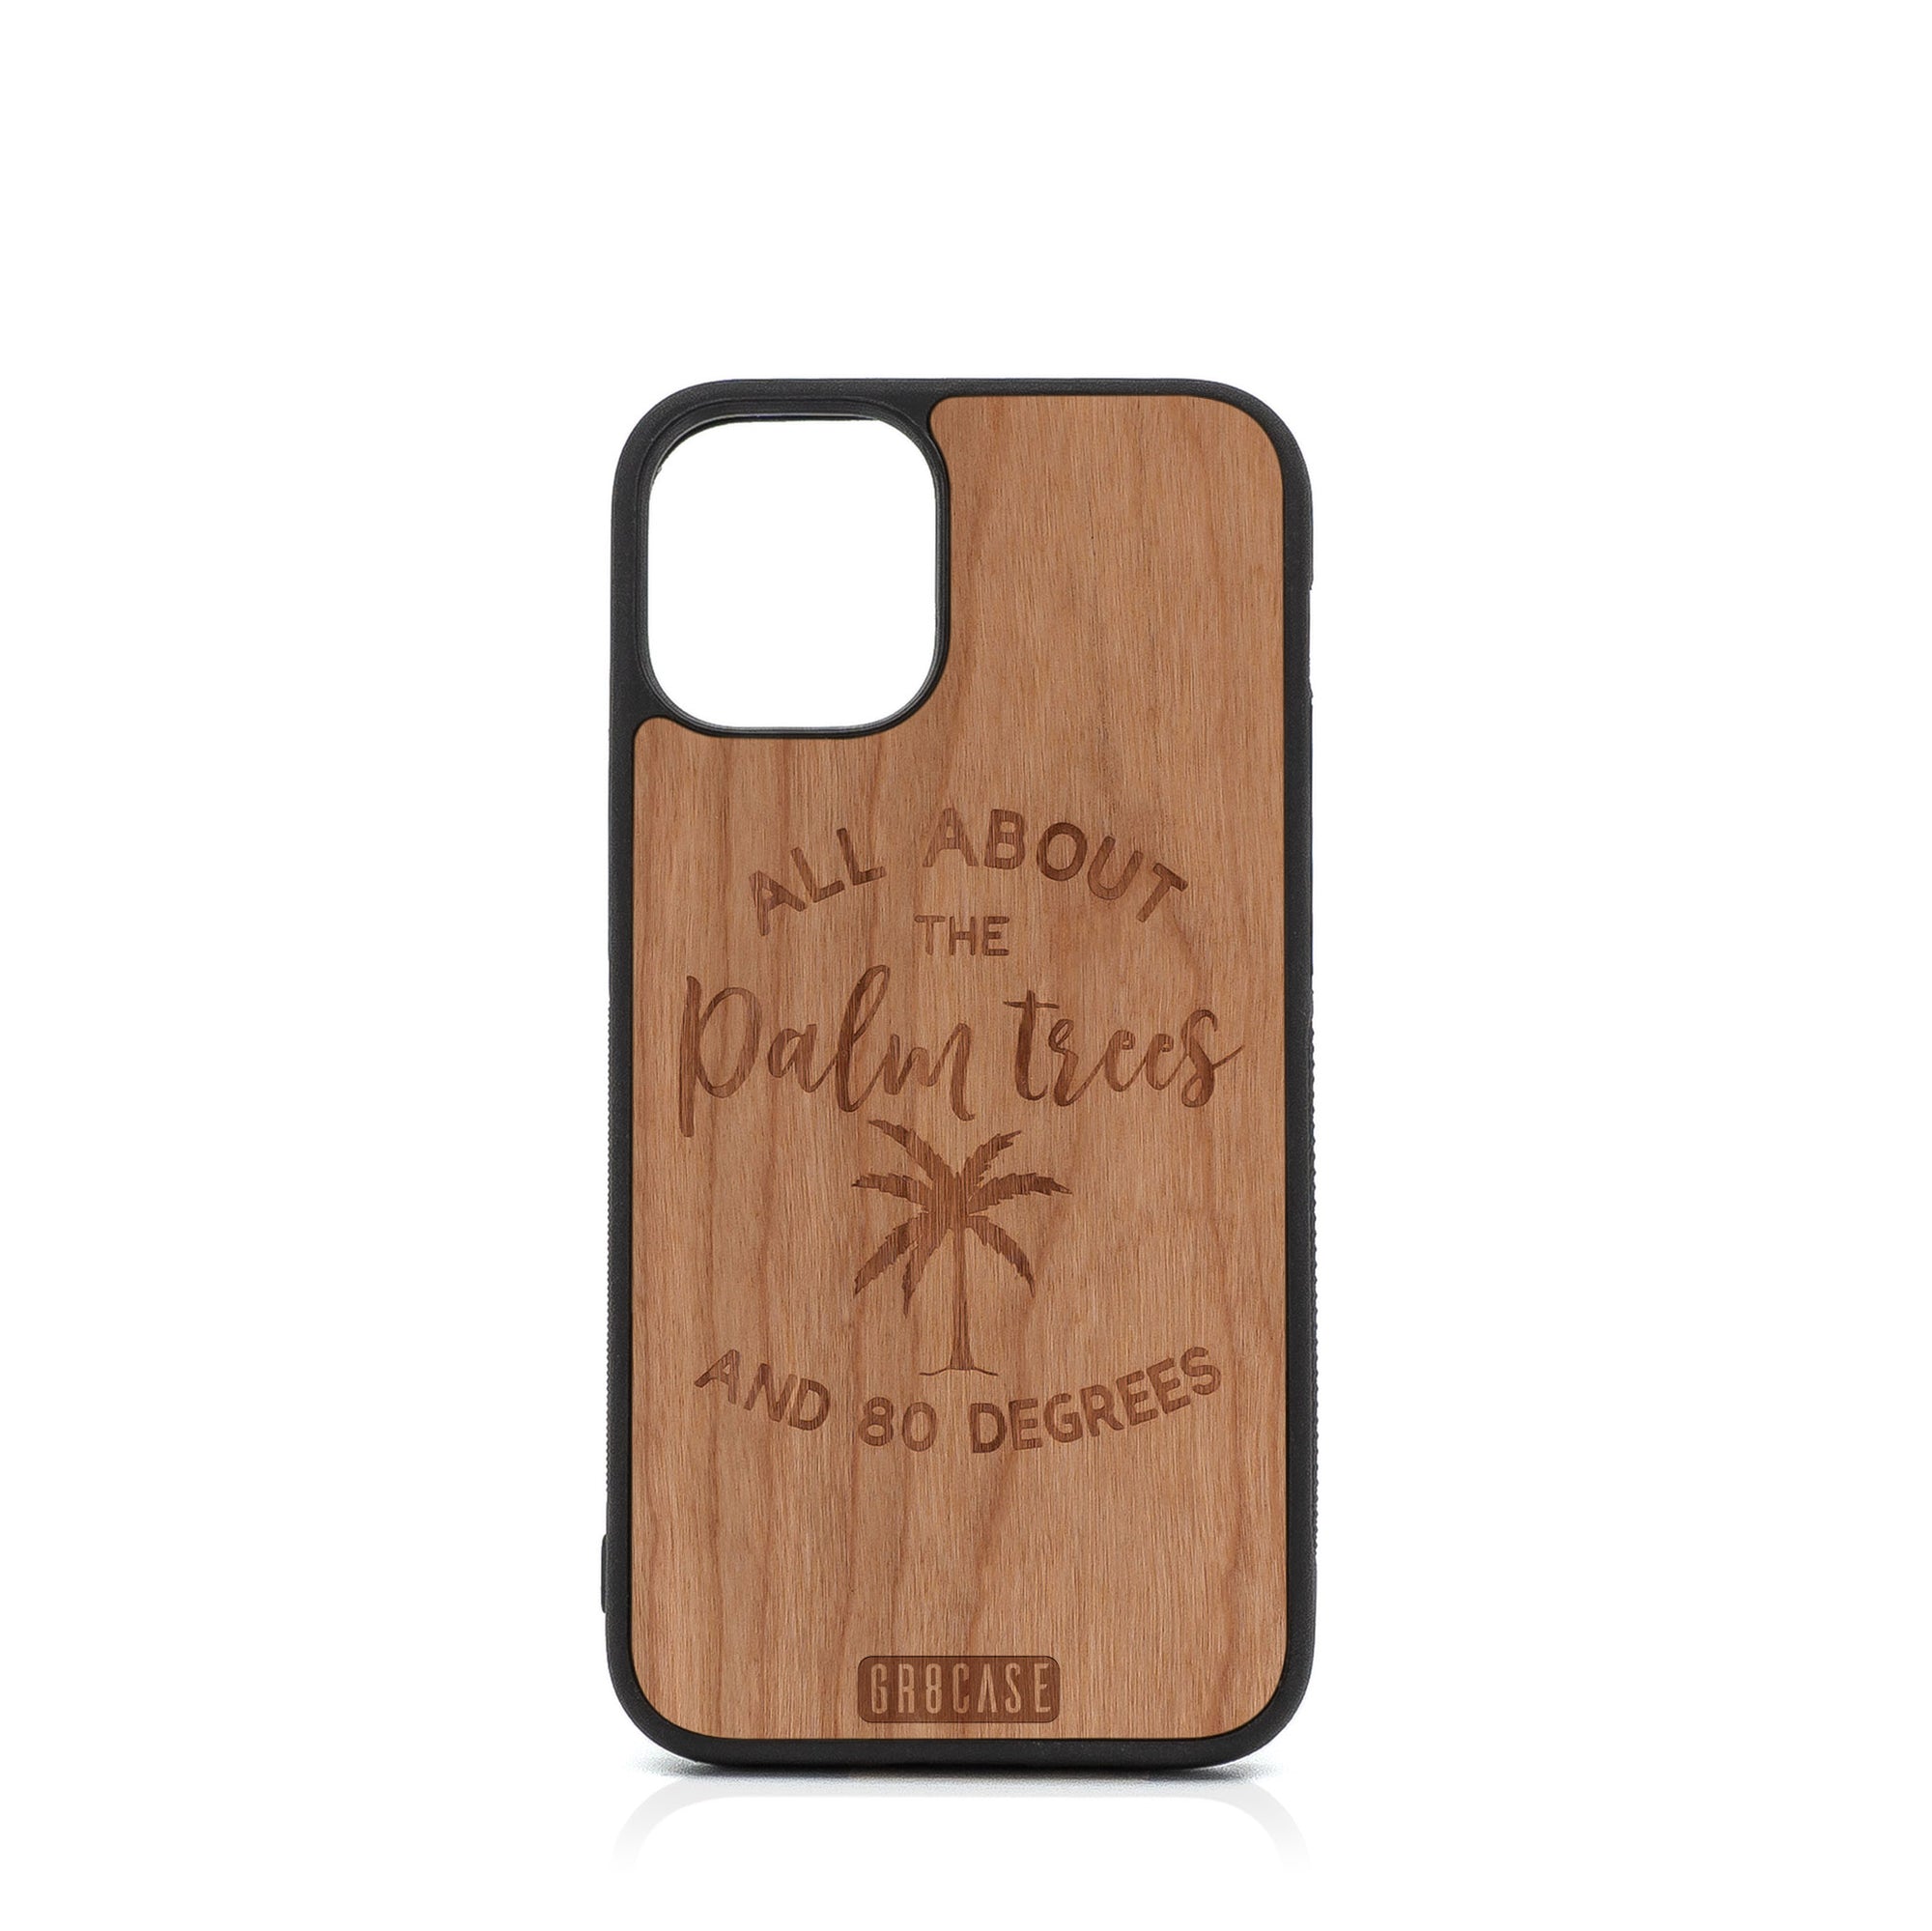 All About The Palm Trees And 80 Degrees Design Wood Case For iPhone 12